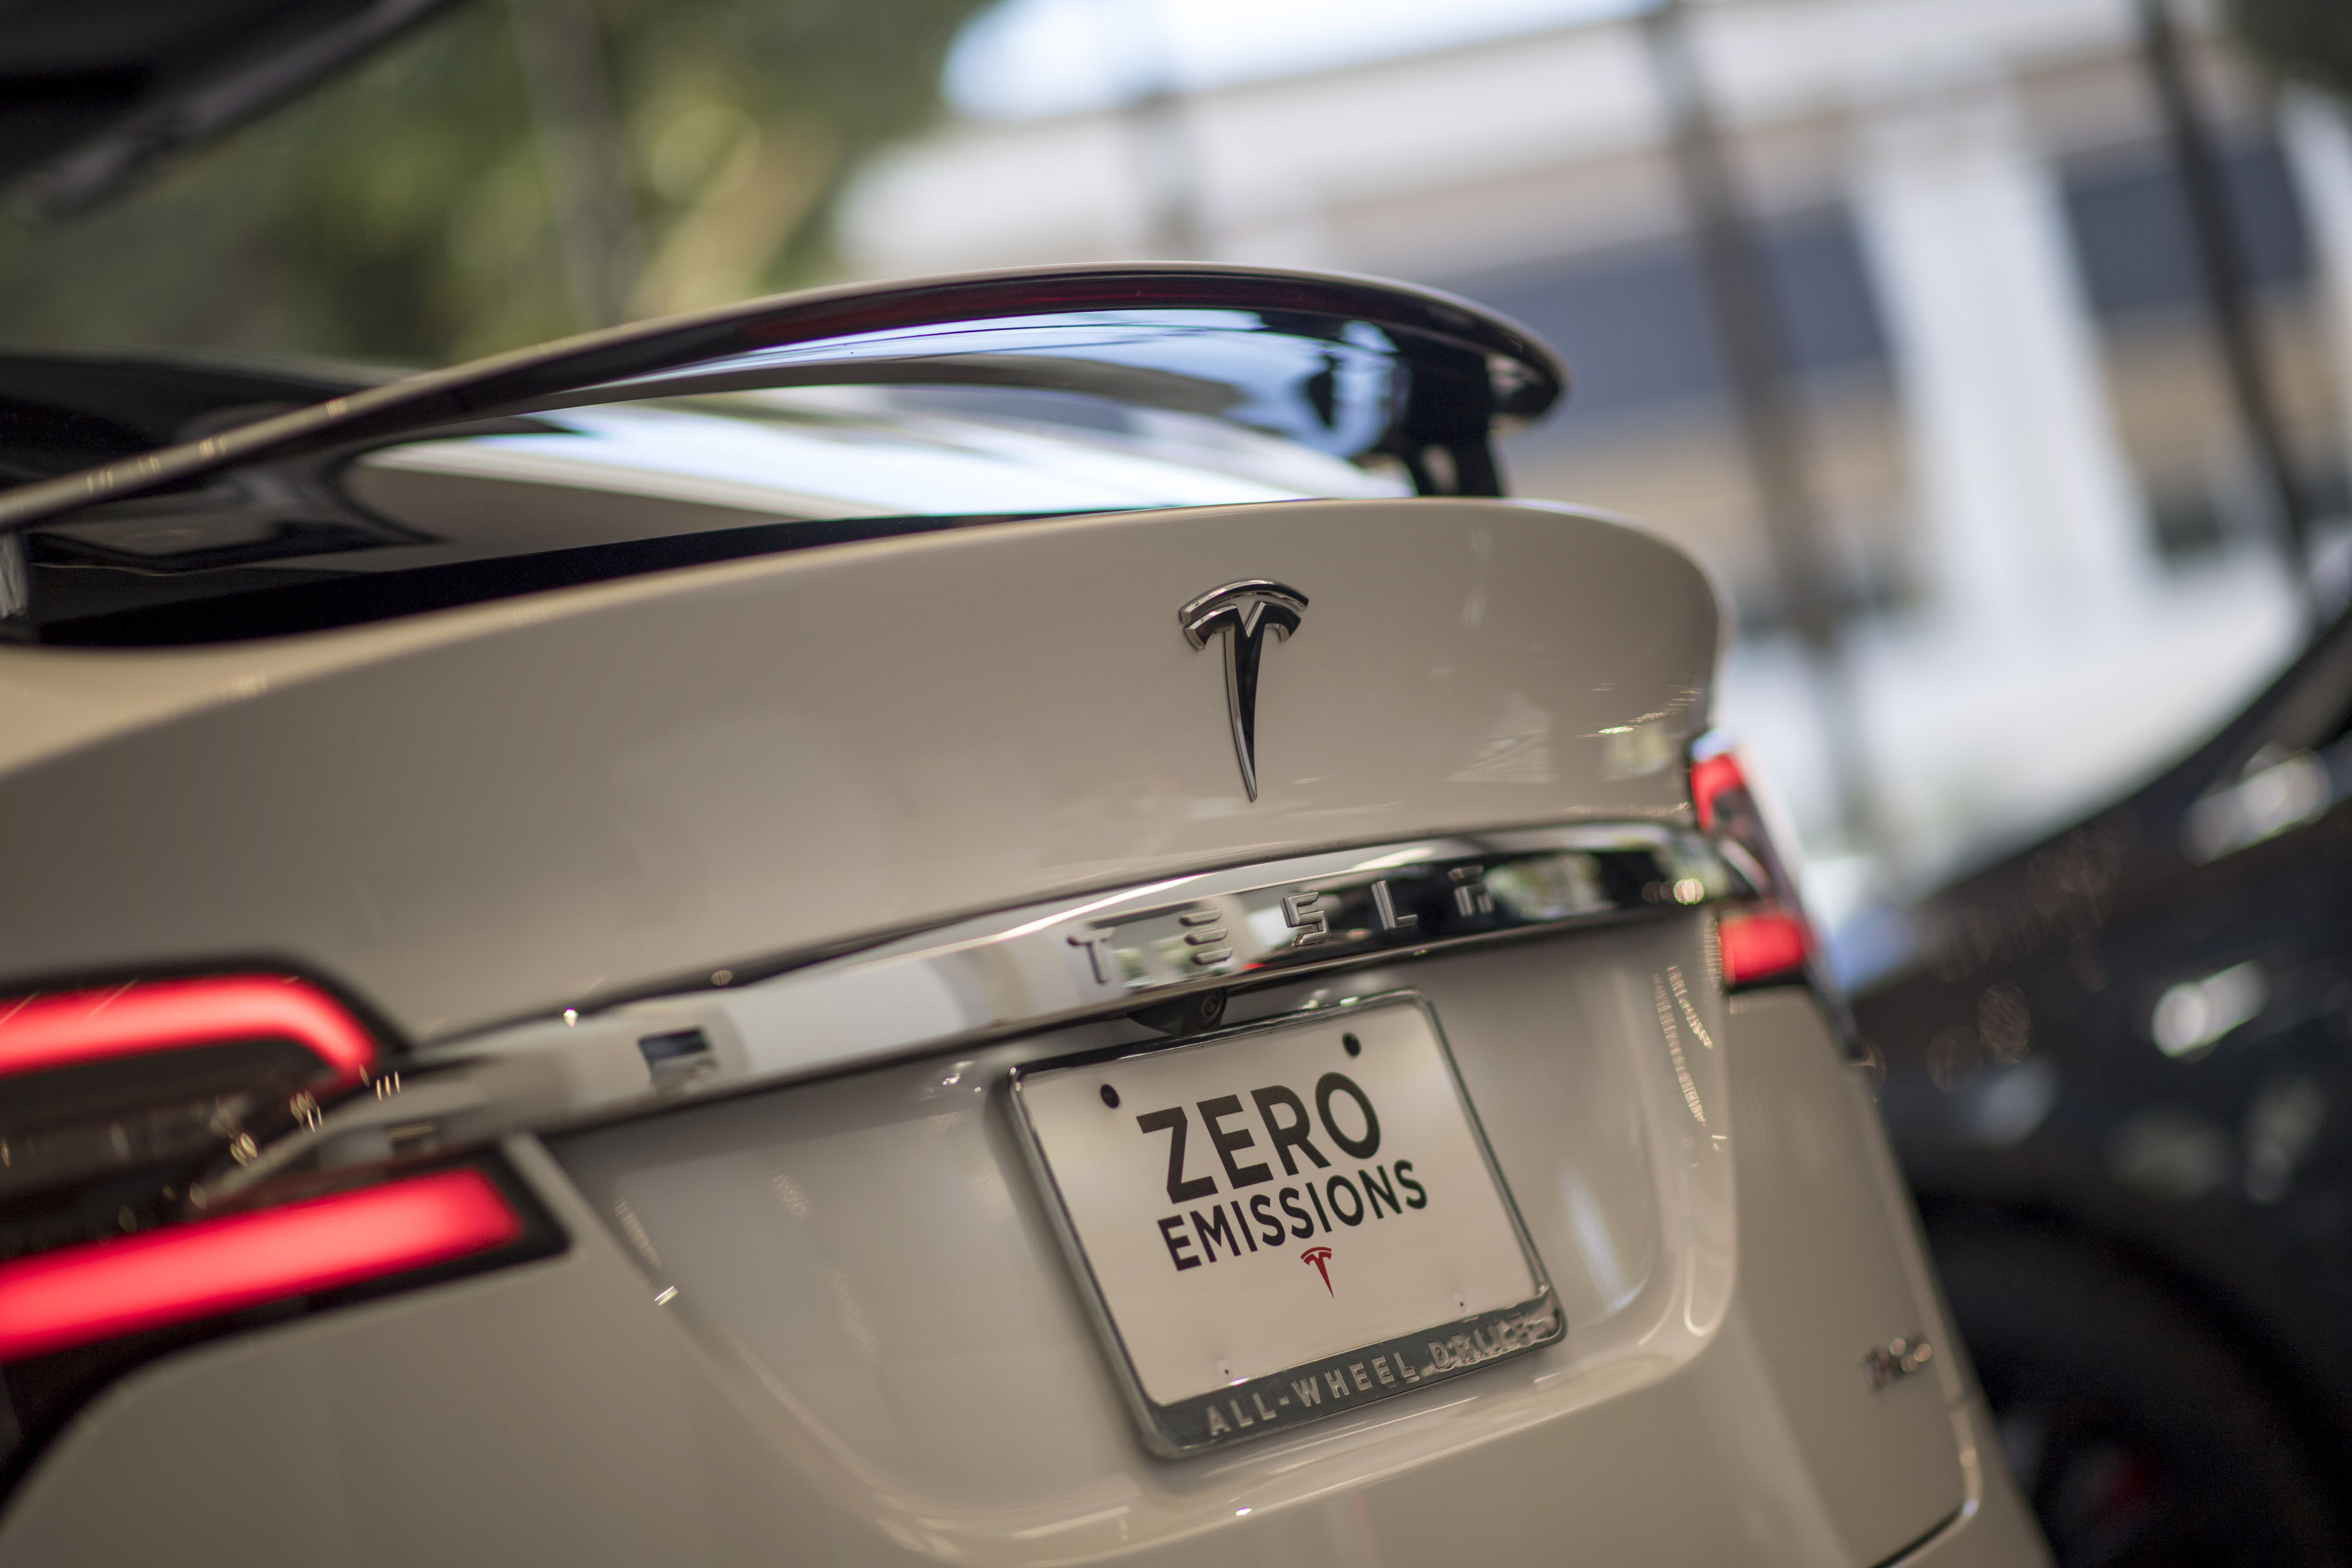 A Tesla Motors Inc. Model S vehicle is displayed at the company's new showroom in San Francisco, California, U.S., on Wednesday, Aug. 10, 2016. (David Paul Morris&mdash;Bloomberg /Getty Images)